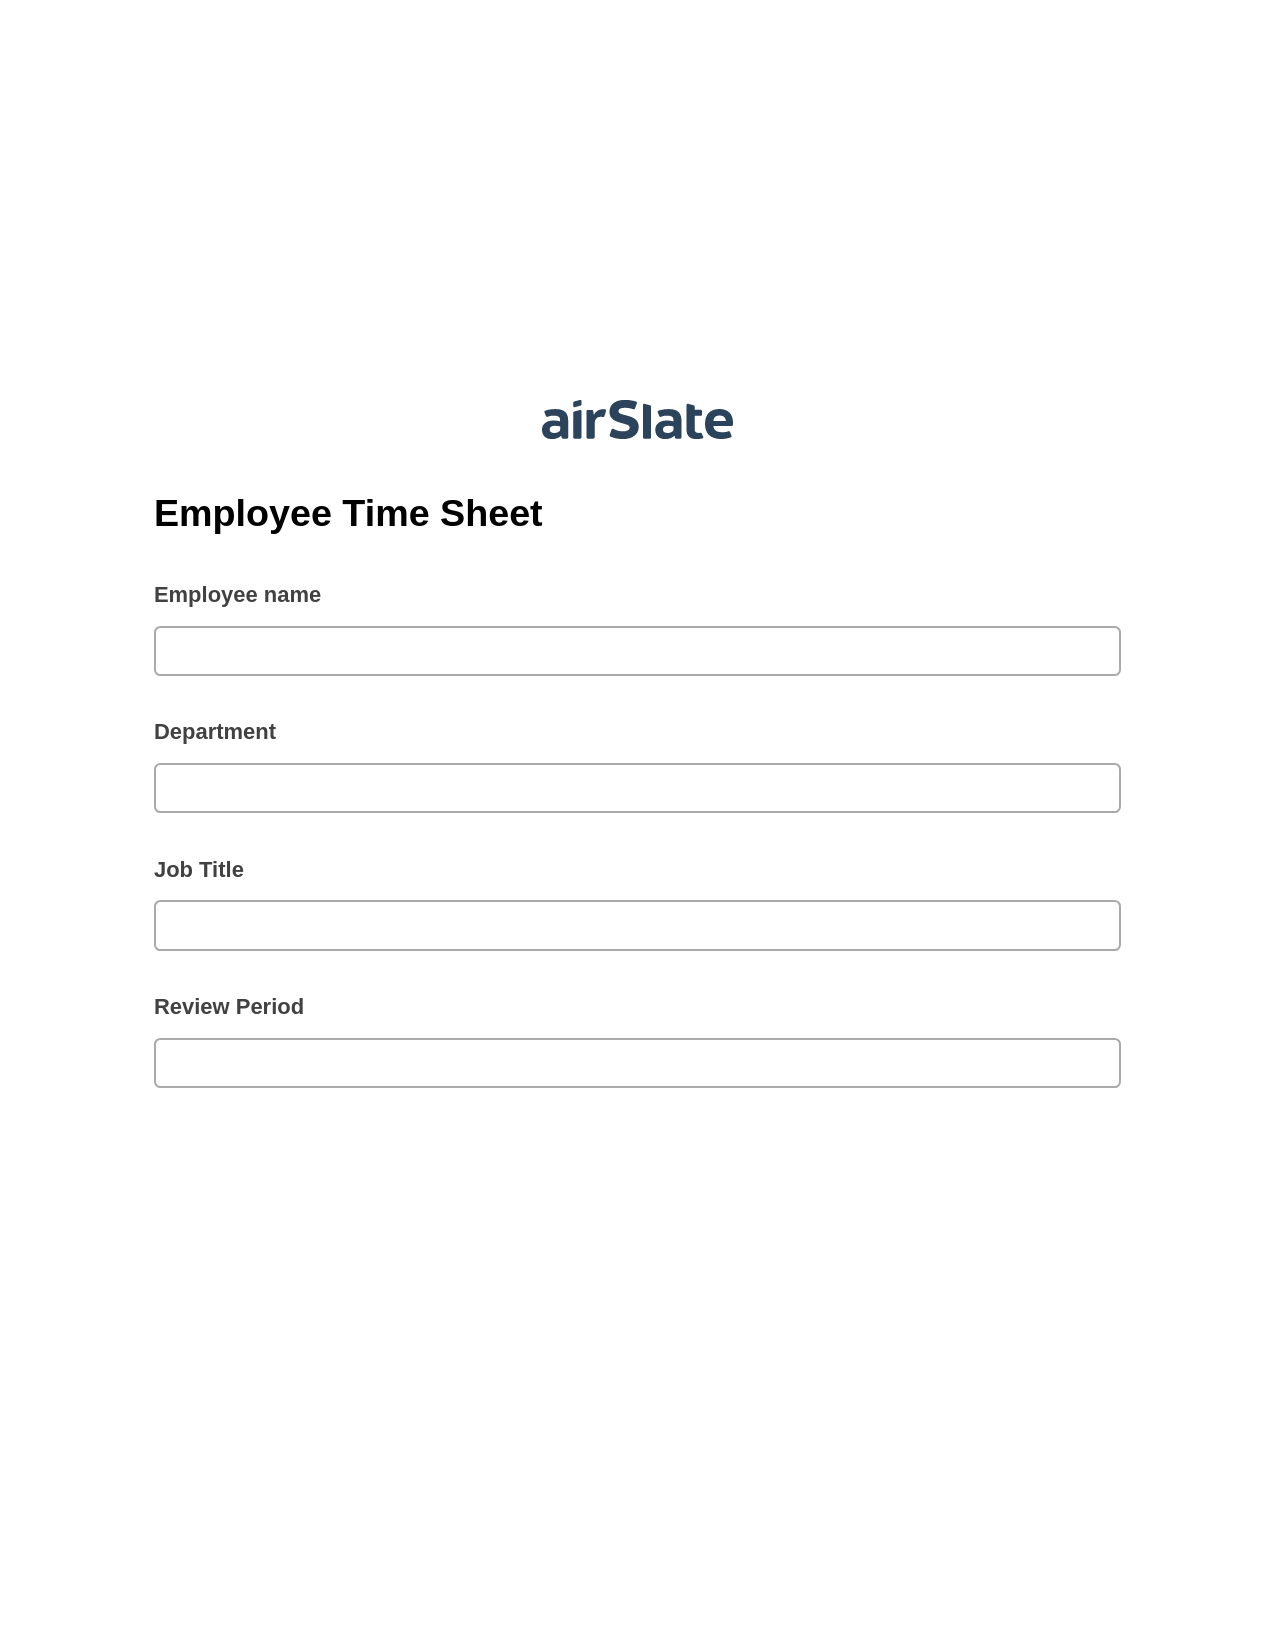 Employee Time Sheet Pre-fill from another Slate Bot, Create Salesforce Records Bot, Export to Smartsheet